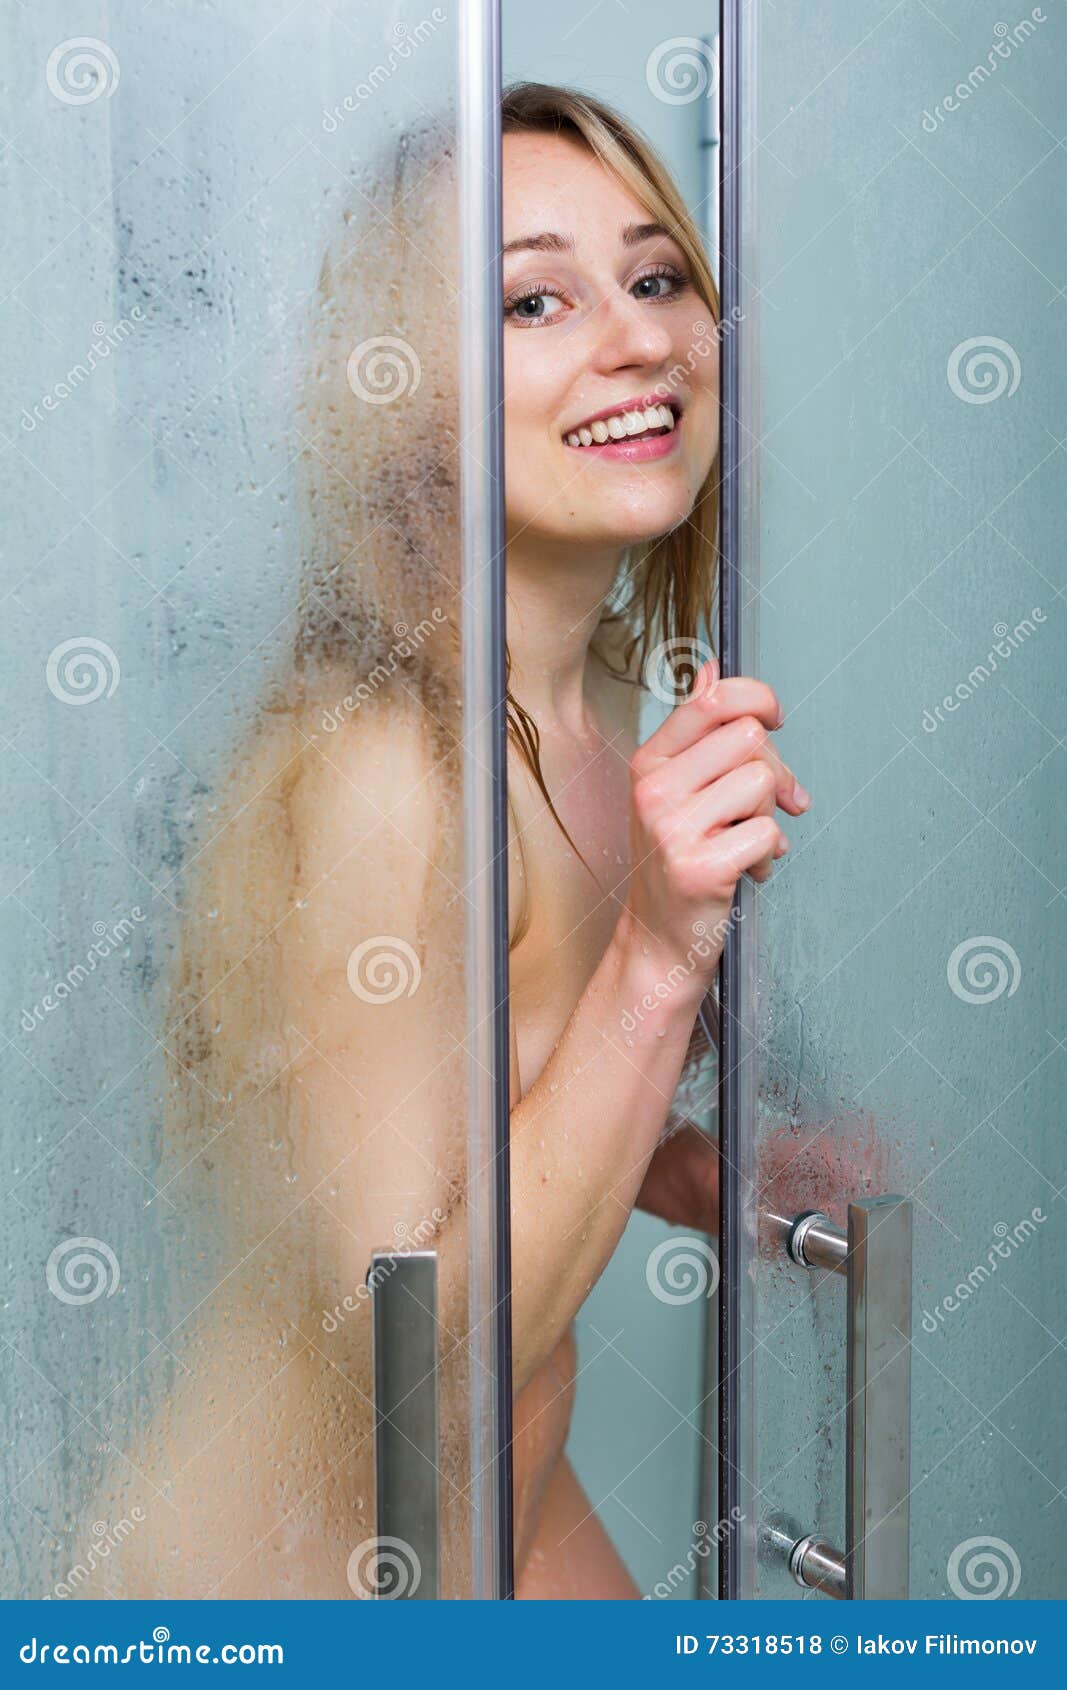 Naked lady in shower